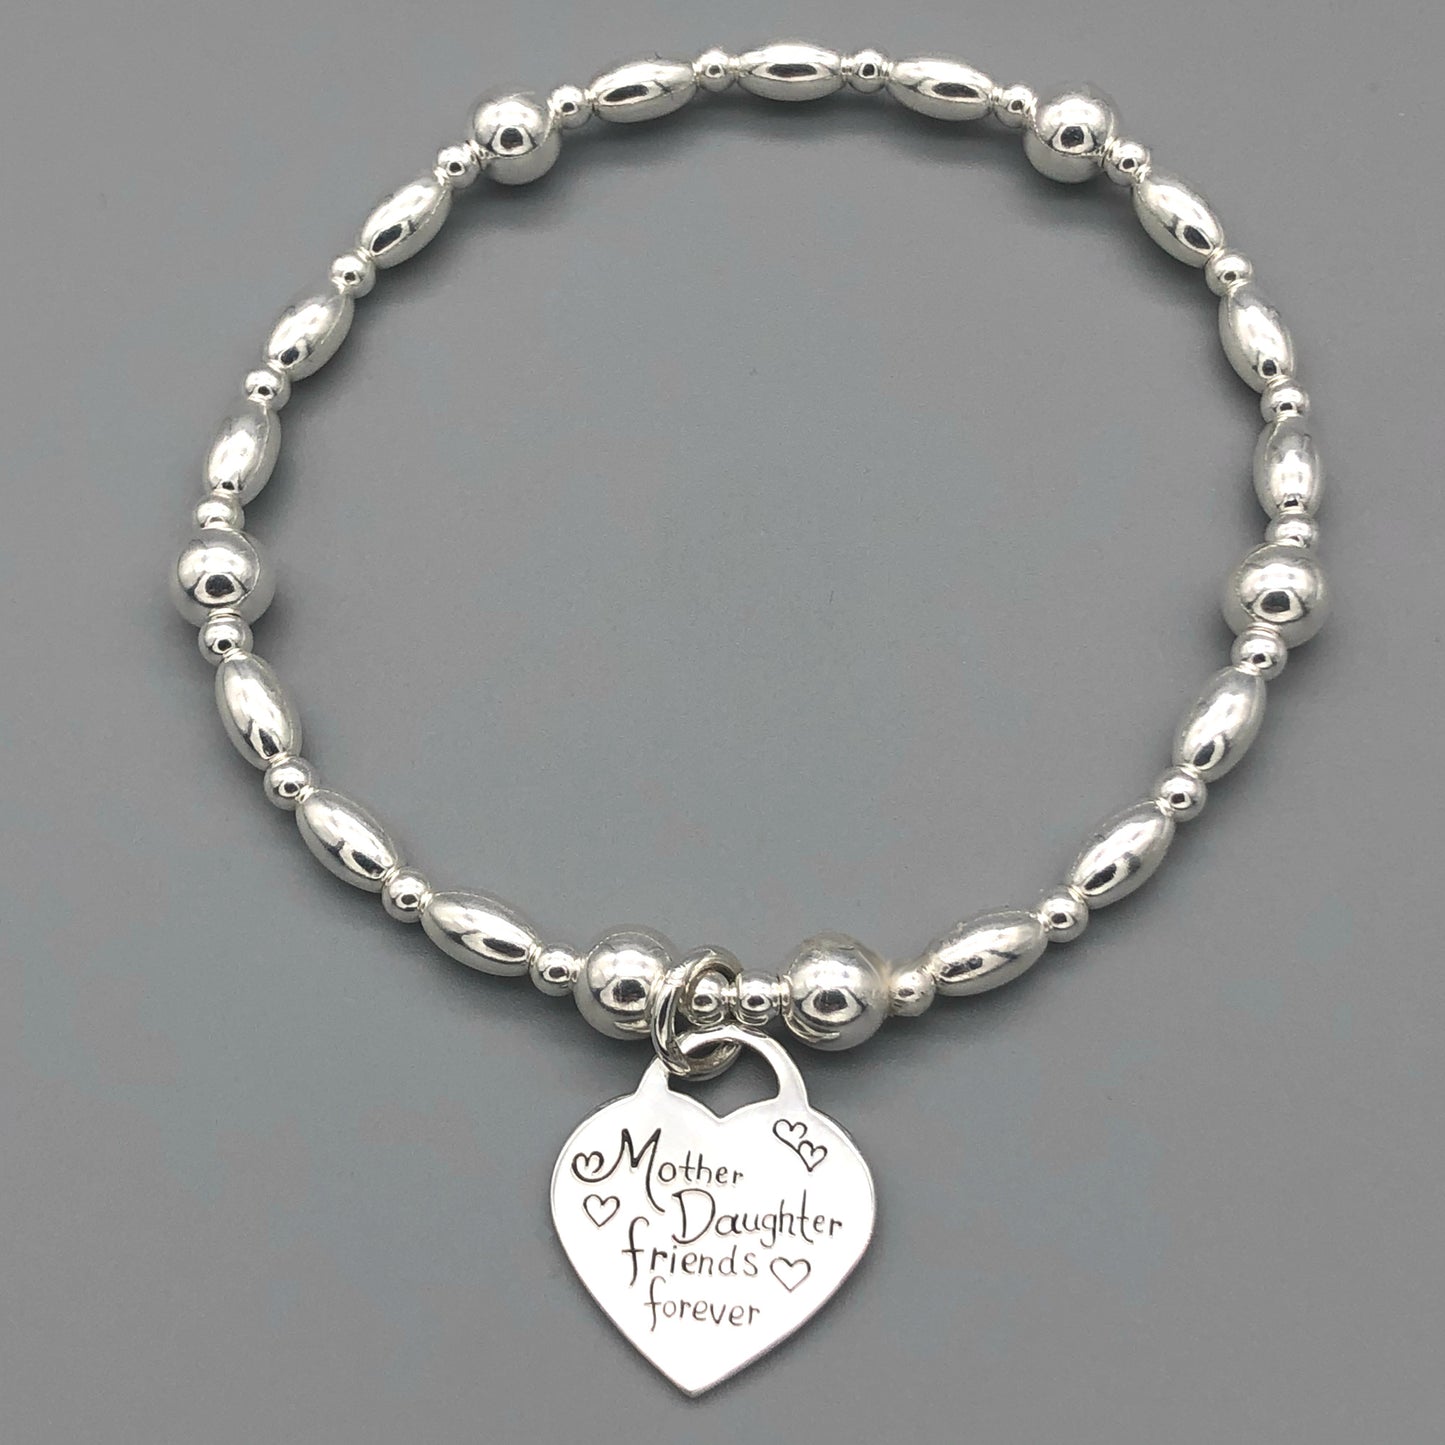 "Mother & daughter, friends forever" charm sterling silver women's stacking bracelet by My Silver Wish